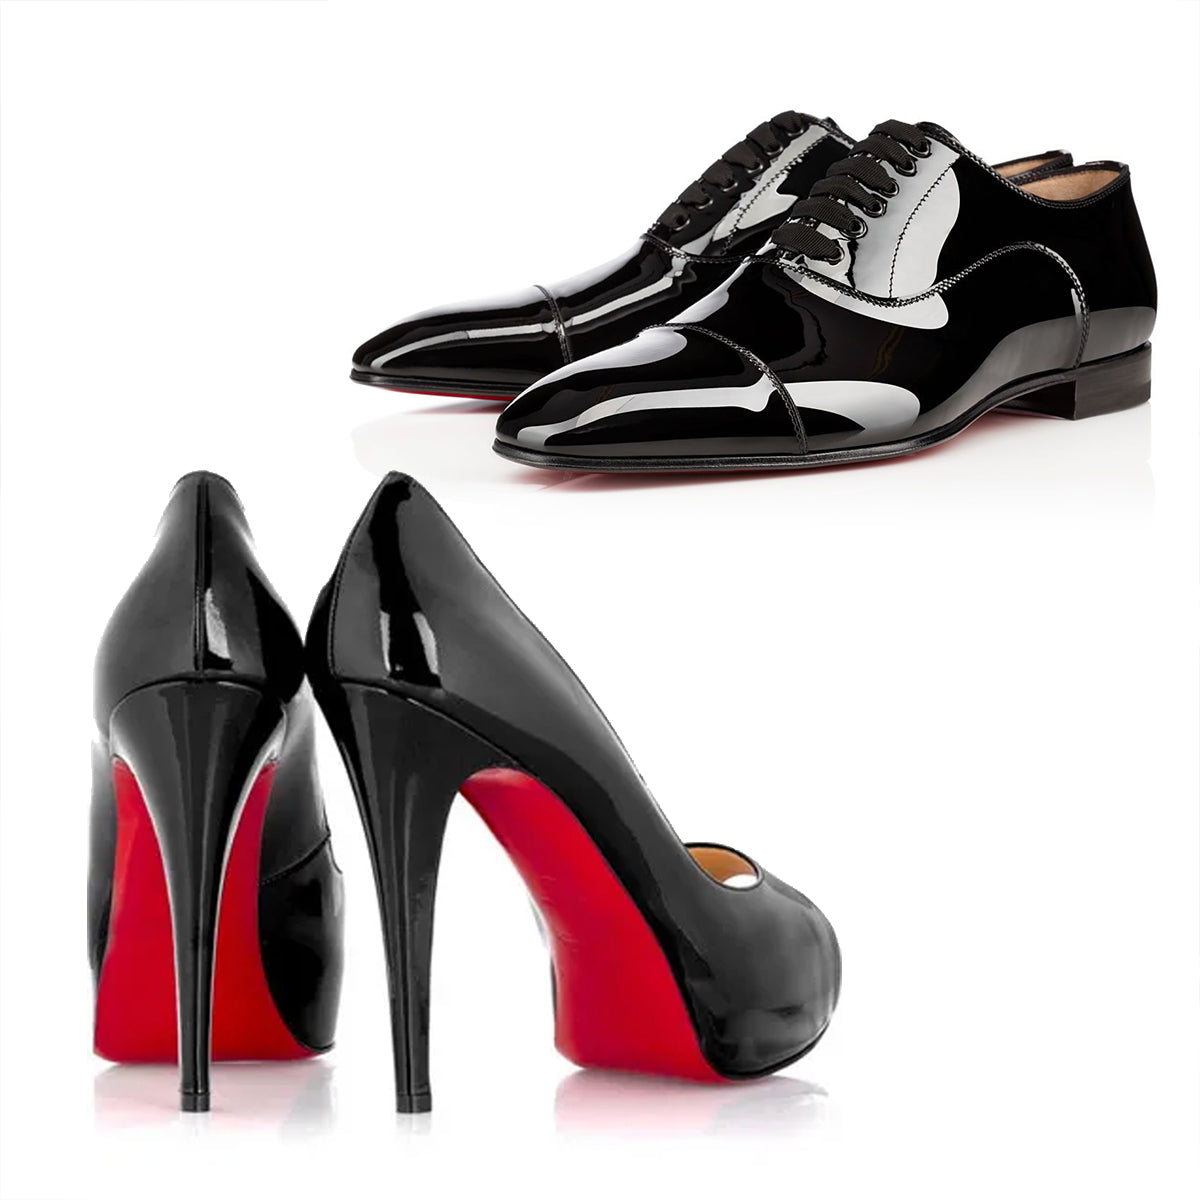 LOUBOUTIN SHOES / HEELS SERVICES WITH RETURN SHIPPING PRICE - £80+ -  Sneakers ER